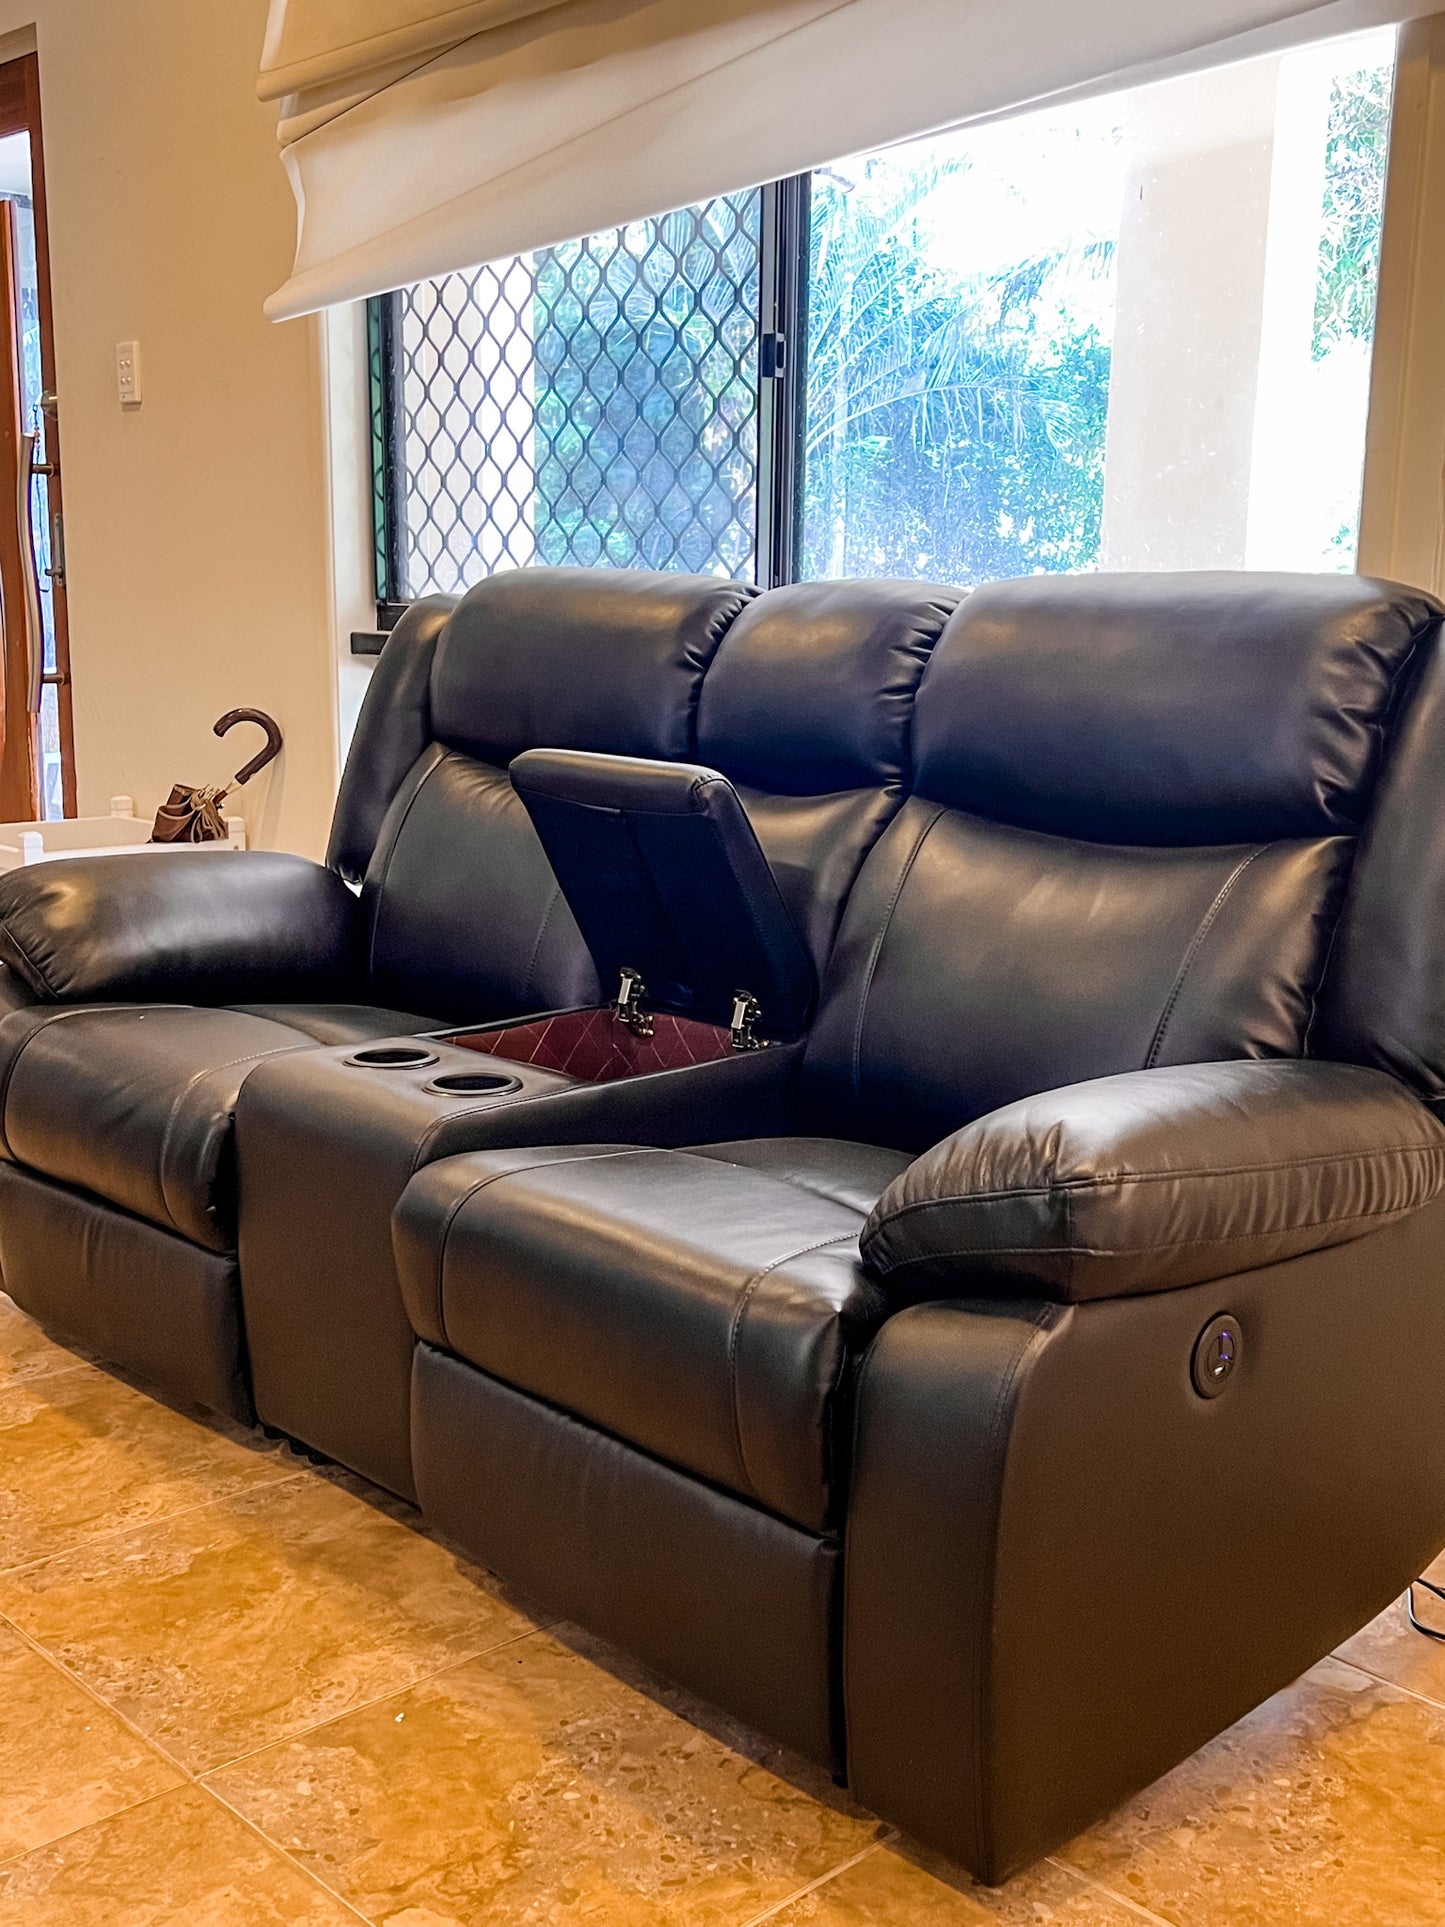 Cinema Recliner 2 Seater in Black Air Leather